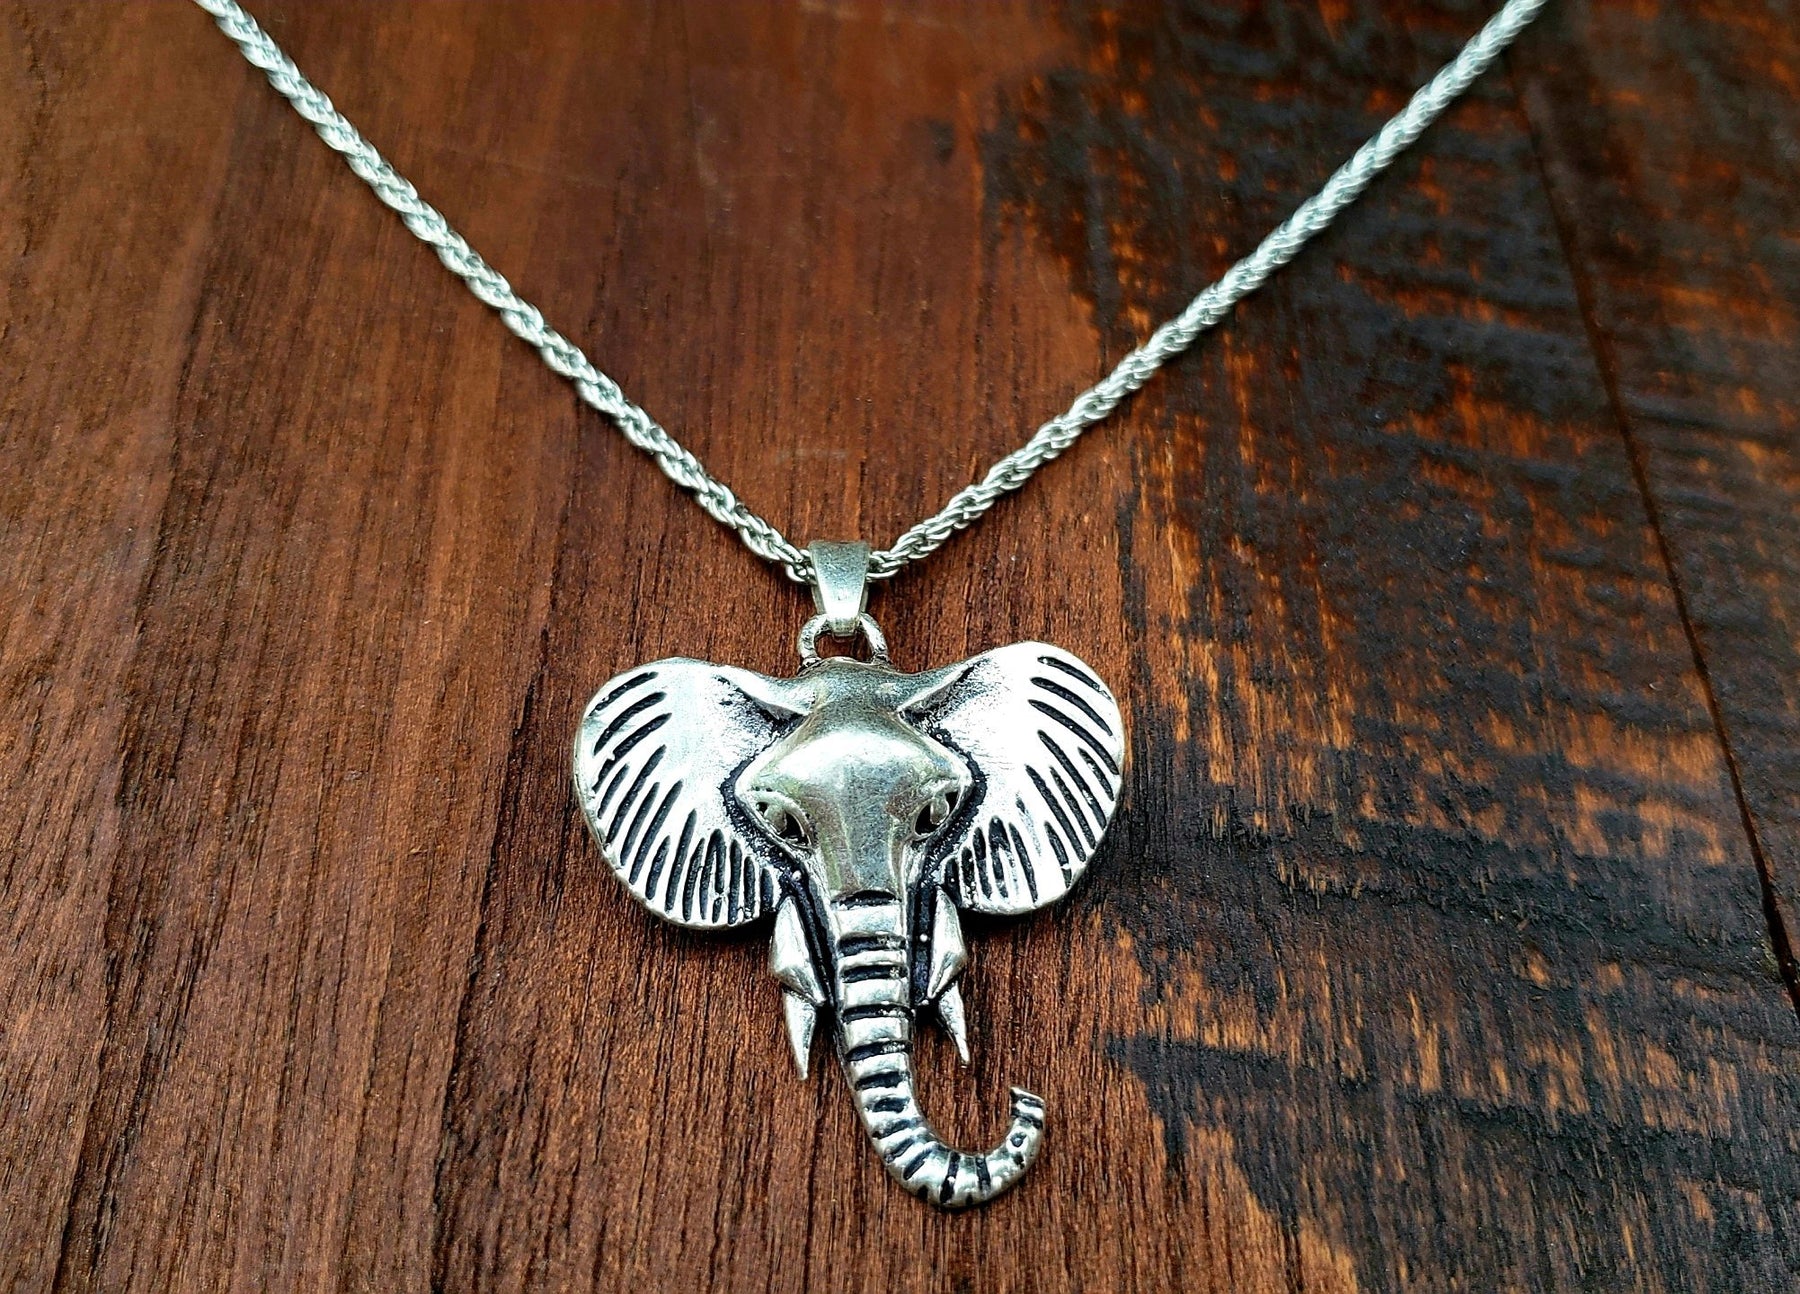 Solid 925 Sterling Silver Large Elephant Pendant Necklace Curb Chain 16 18  Inches Gift Boxed - Etsy